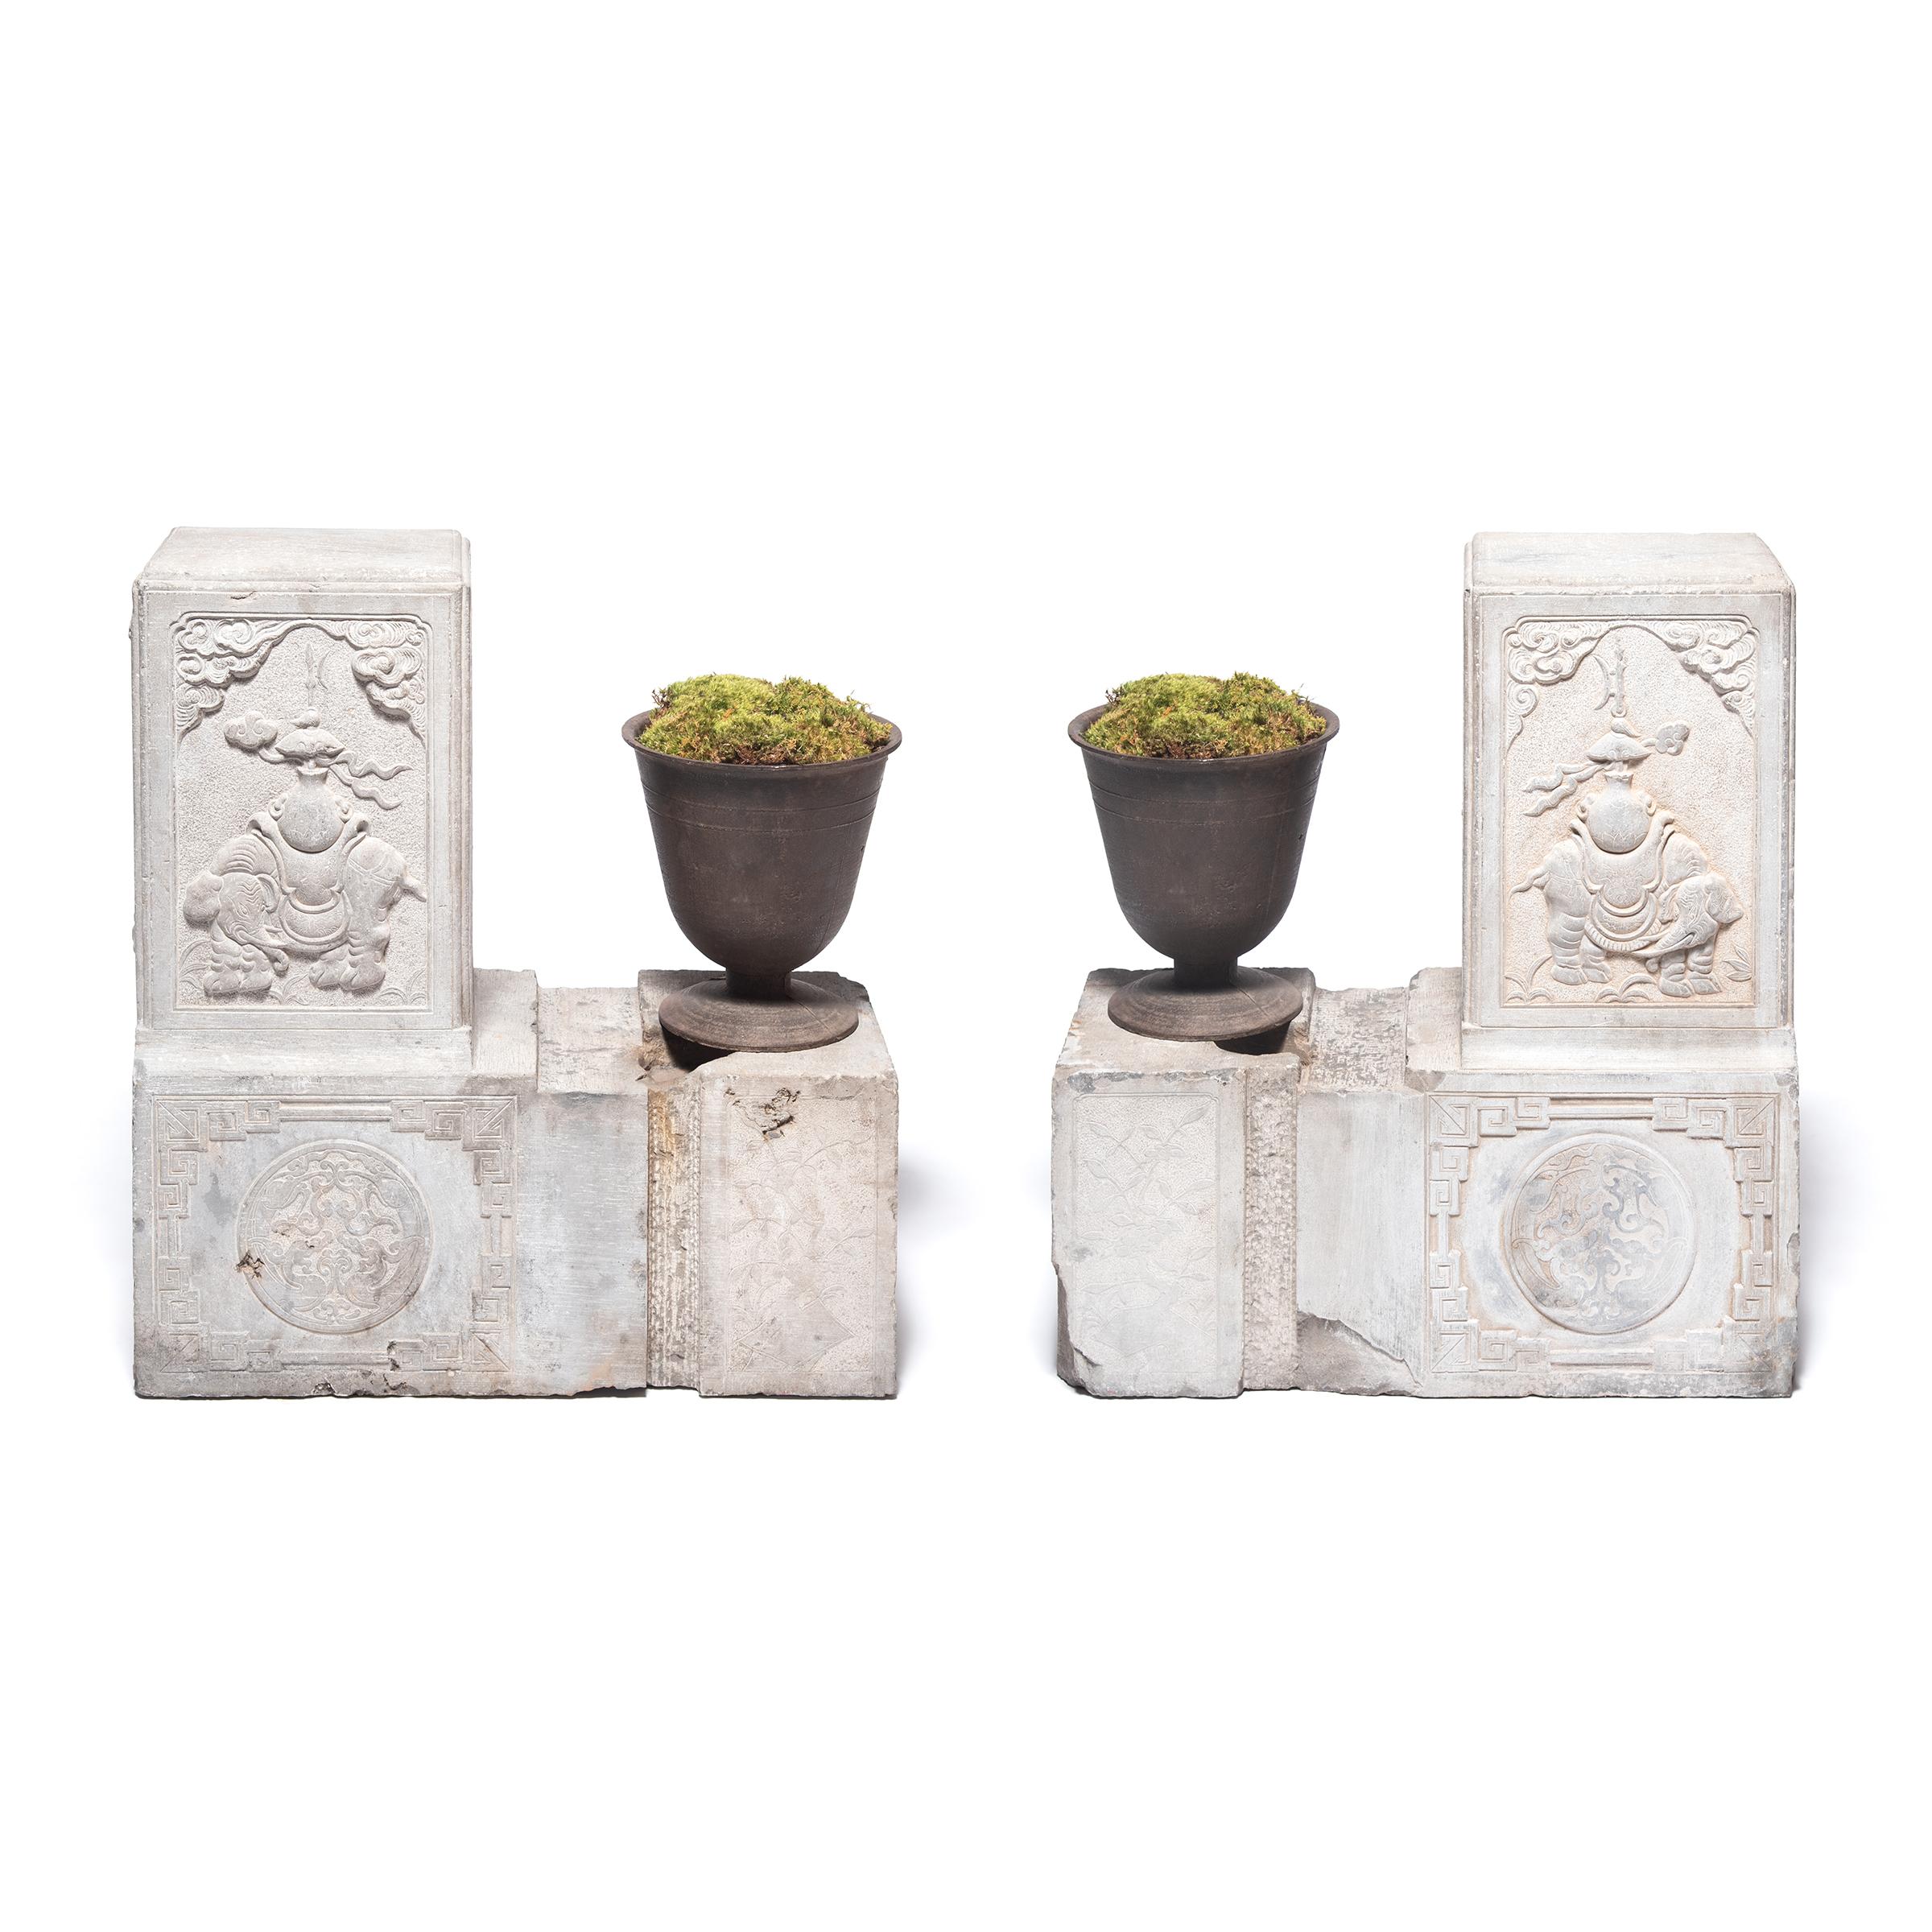 Pair of Chinese Stone Door Posts with Mythical Elephants, c. 1850 For Sale 5